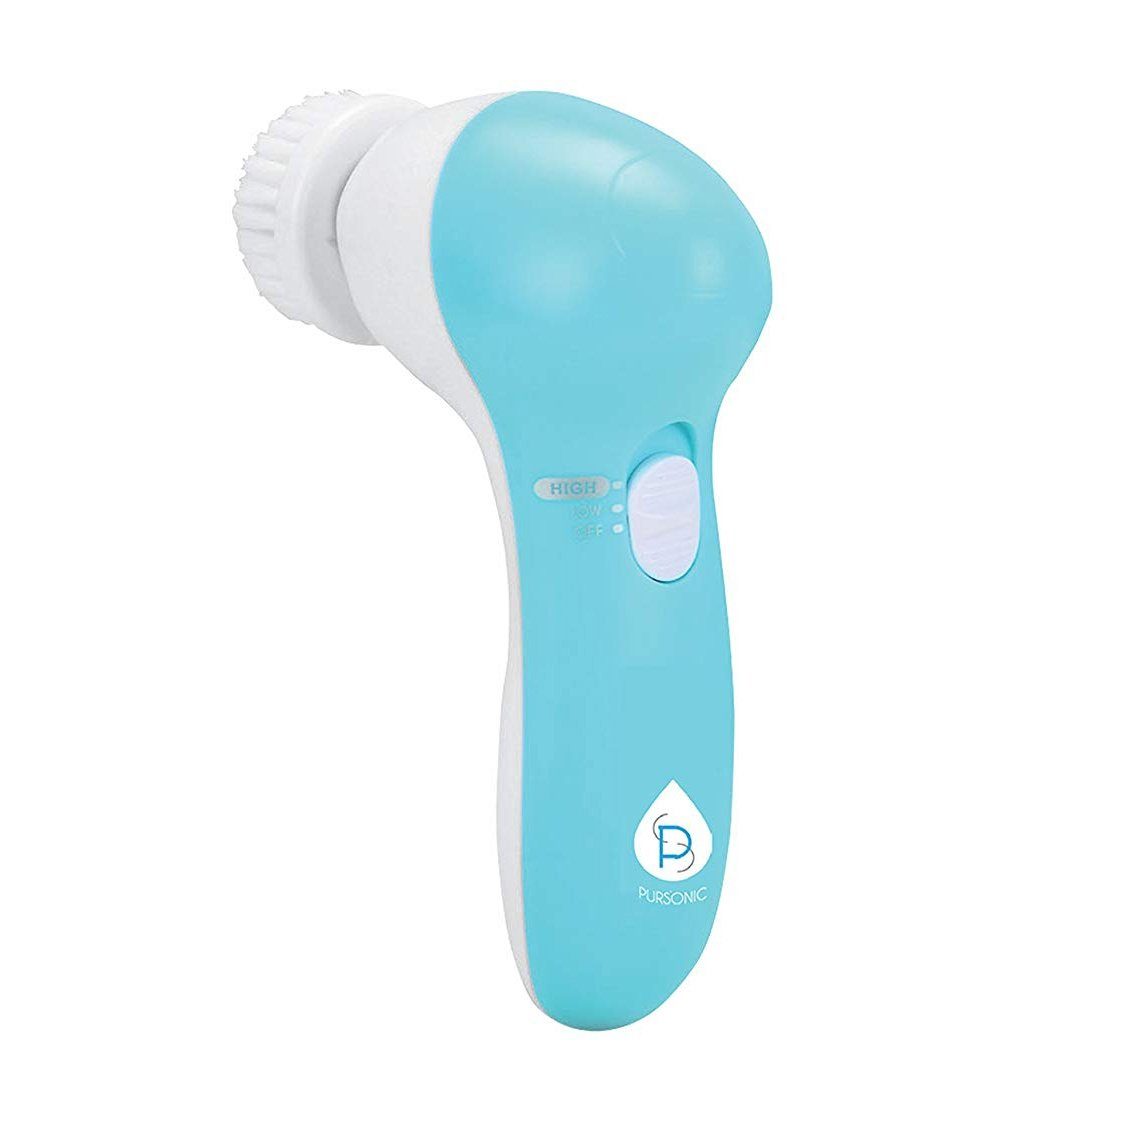 Pursonic 5-in-1 Facial Cleansing Brush and Massager / Light Blue